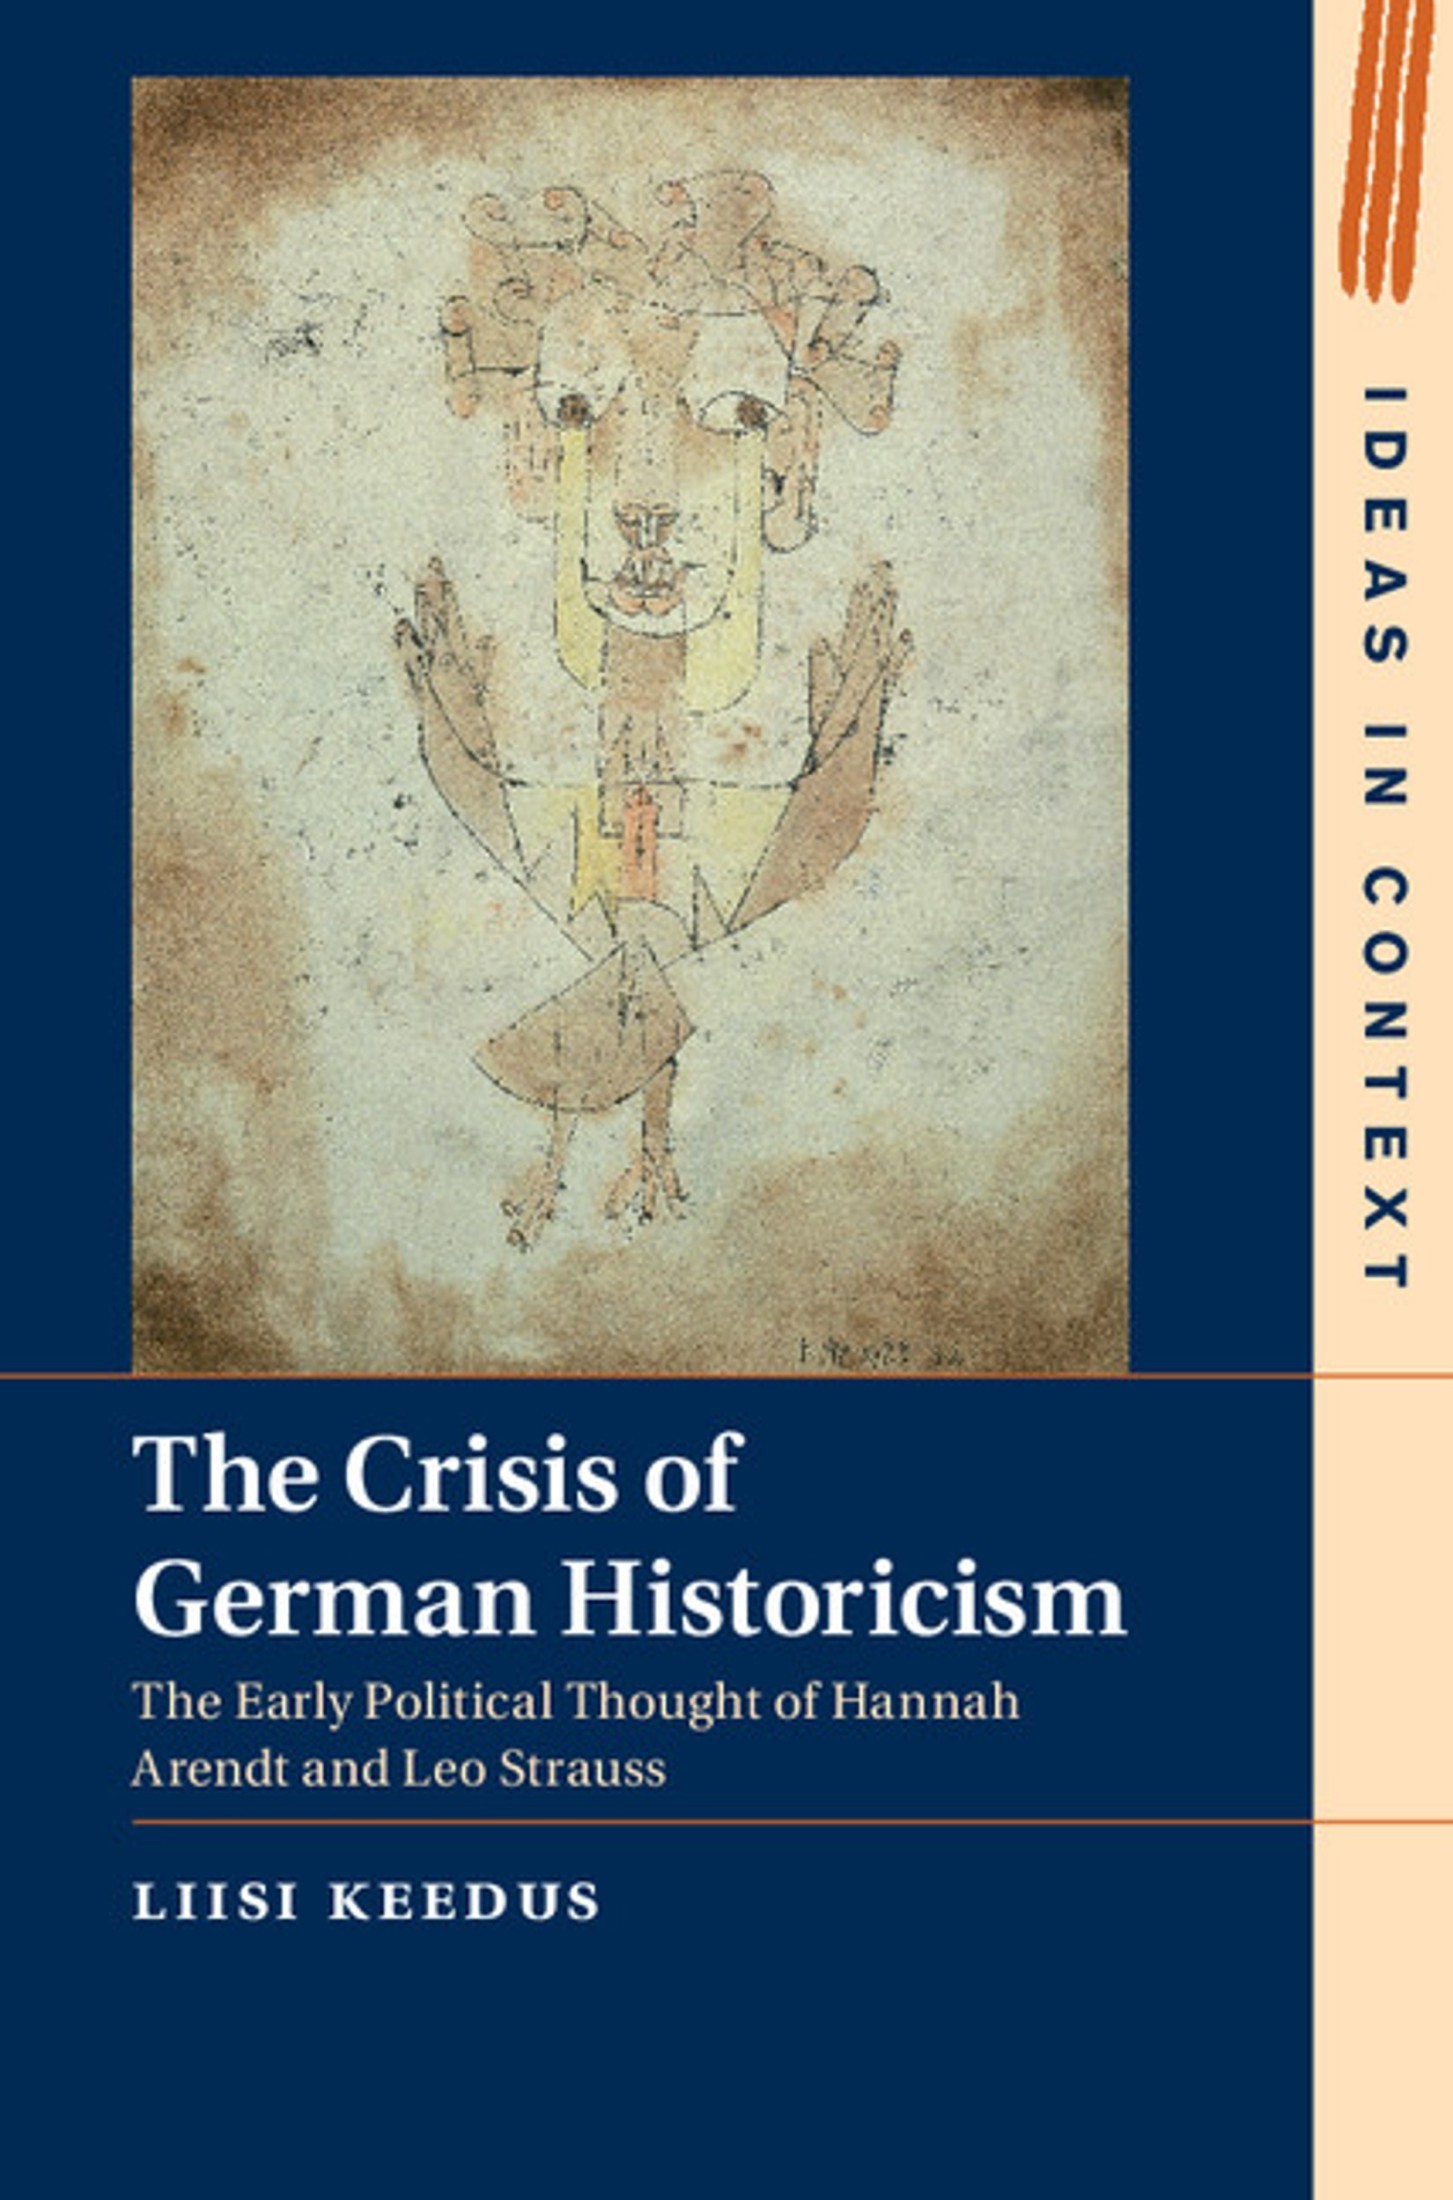 The Crisis of German Historicism